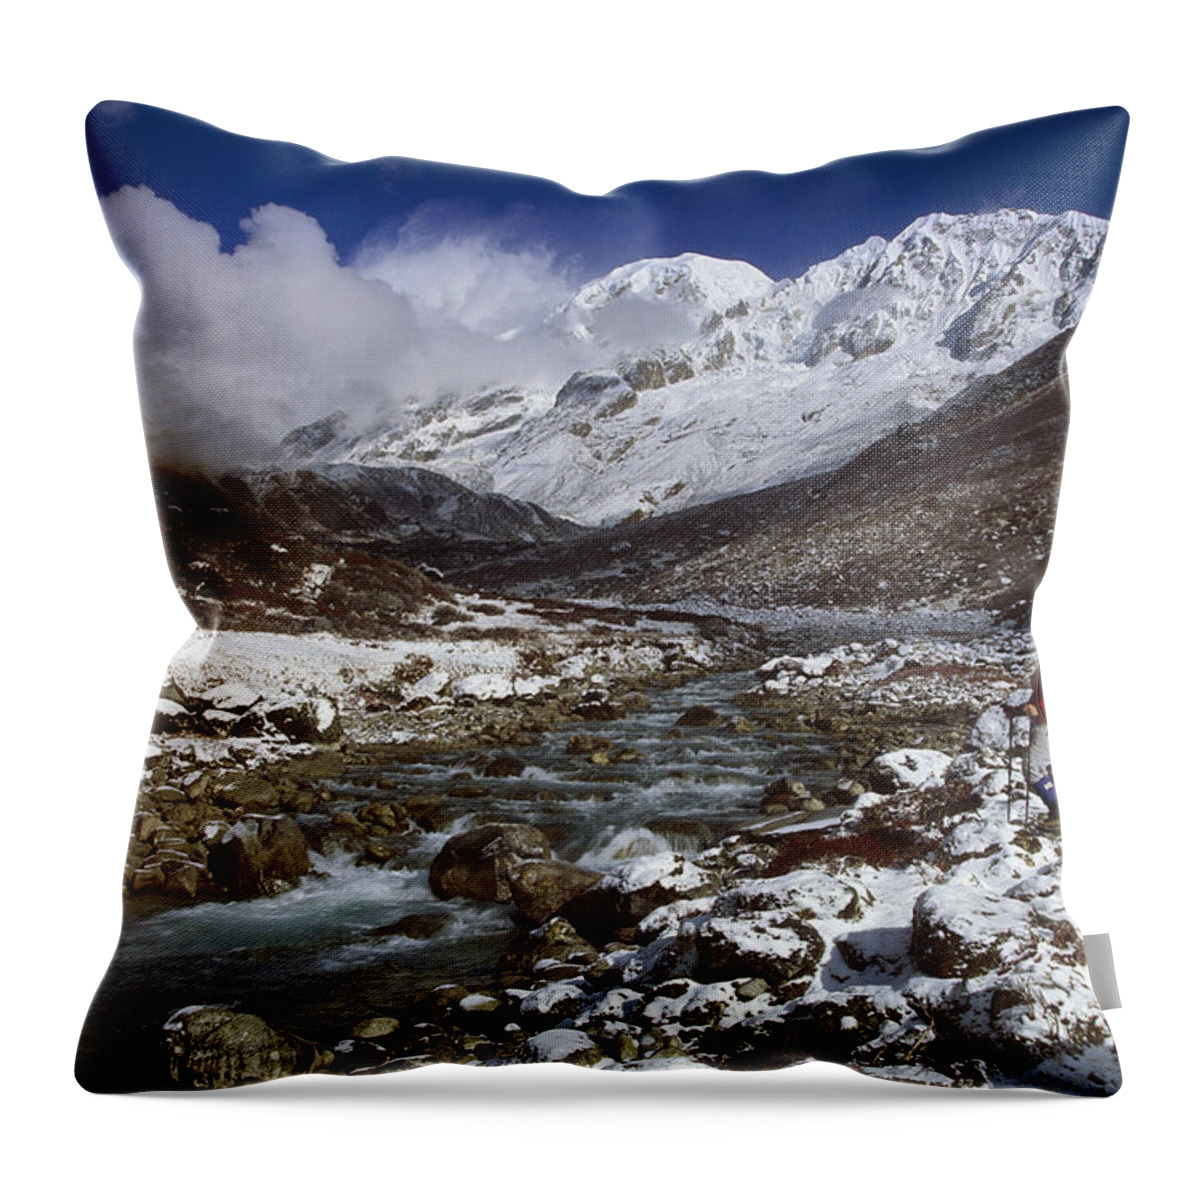 Feb0514 Throw Pillow featuring the photograph Kabru Peak Winter Himalaya India by Colin Monteath